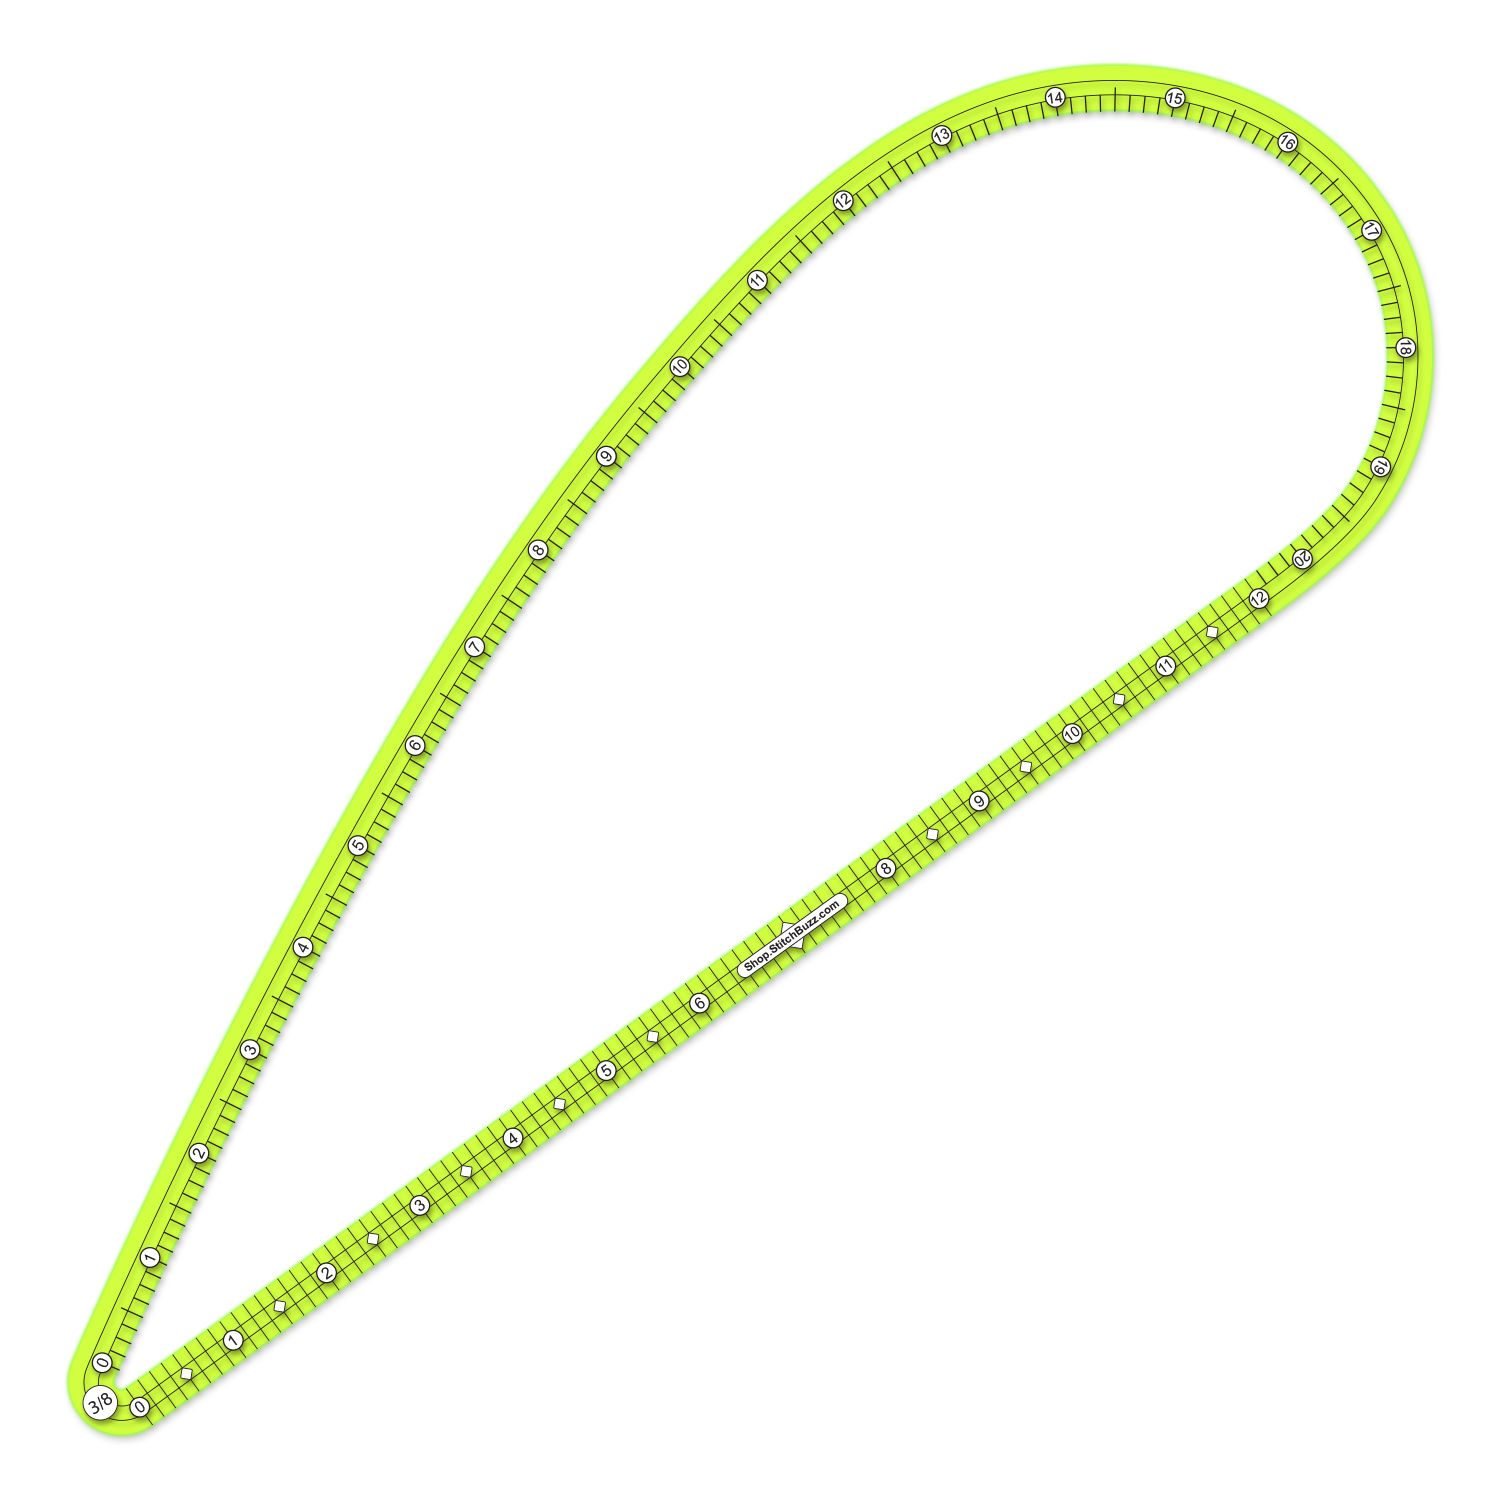 three eigths inch seam allowance large ruler made from neon green transparent acrylic